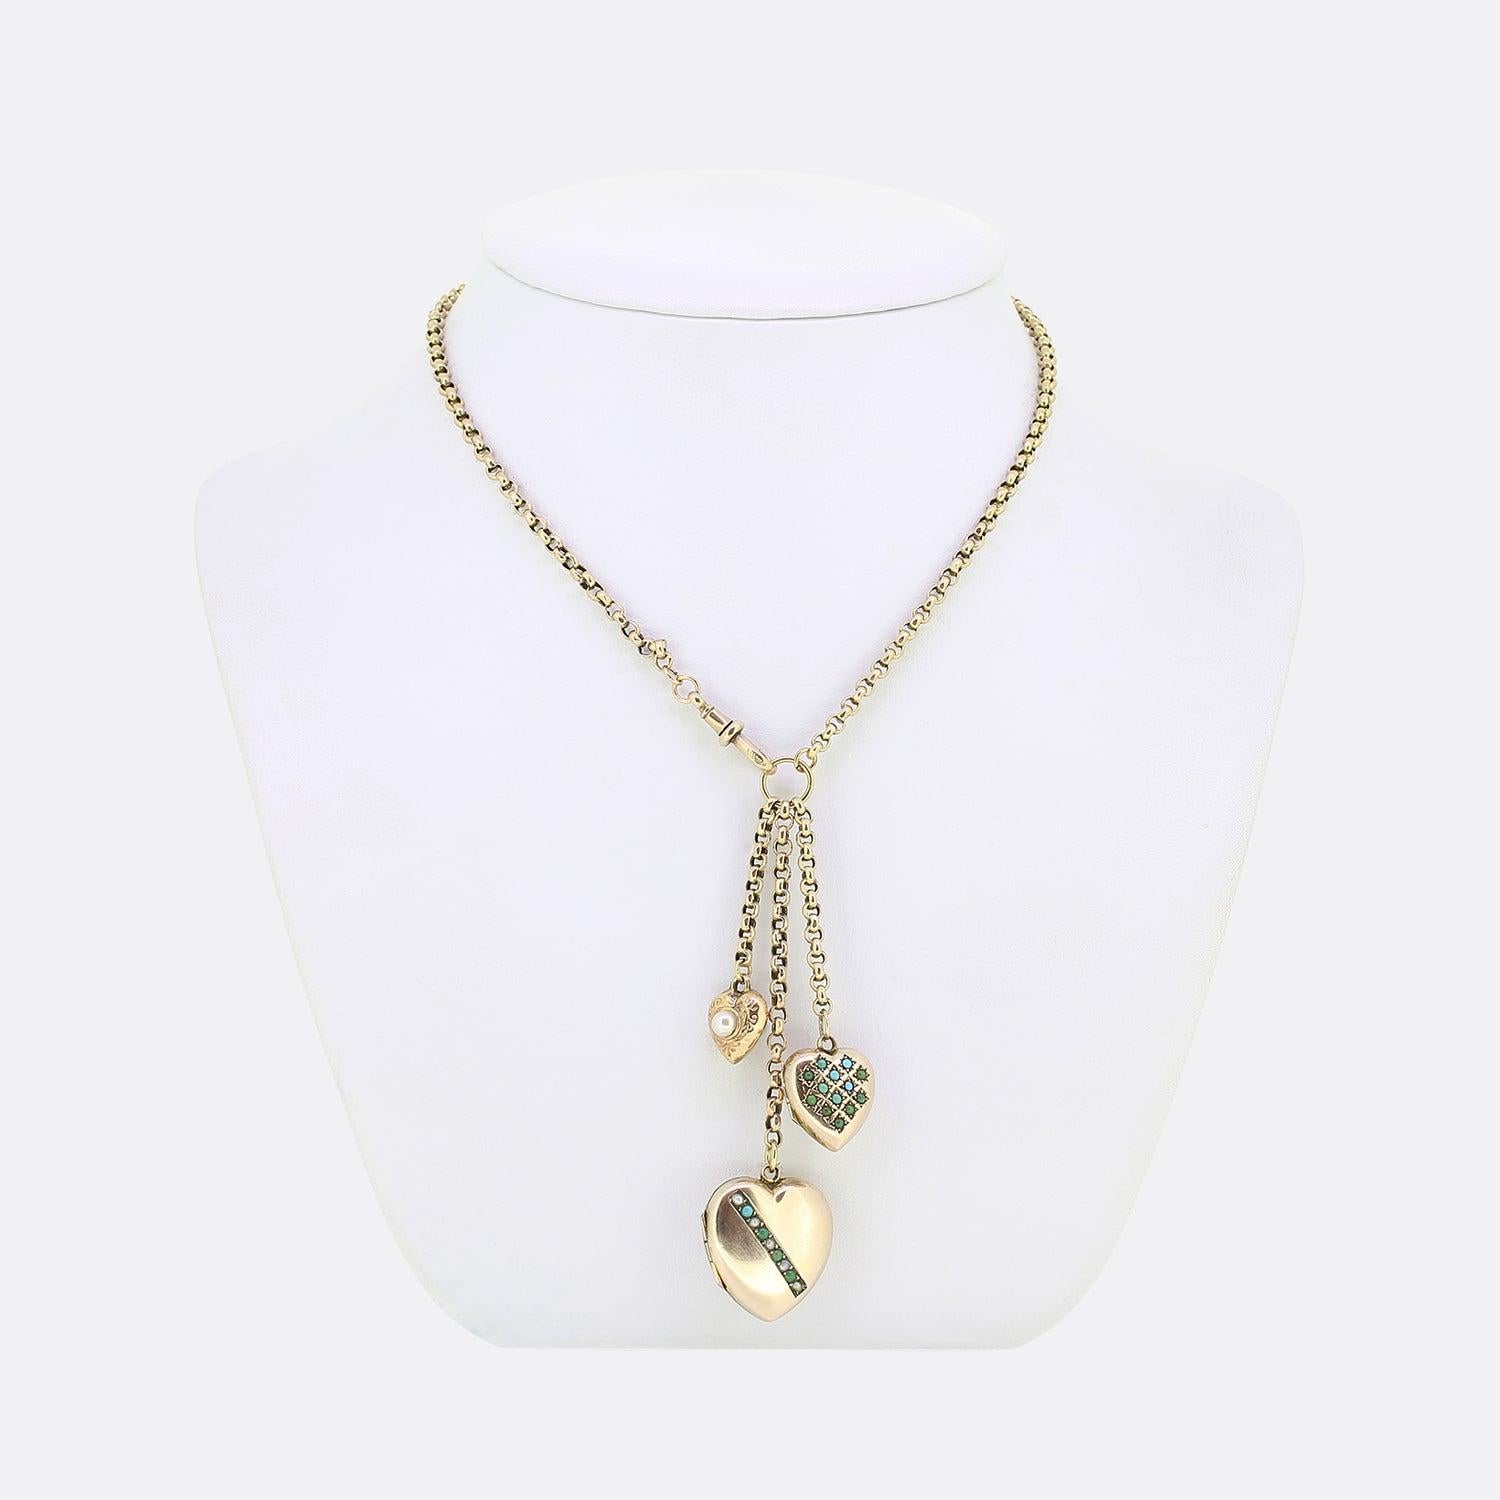 This is a vintage 9ct yellow gold belcher chain link charm necklace. The necklace plays host to a trio of love heart pendants which hang harmoniously side-by-side; two of which are lockets set with seed pearls and green and blue turquoise. The